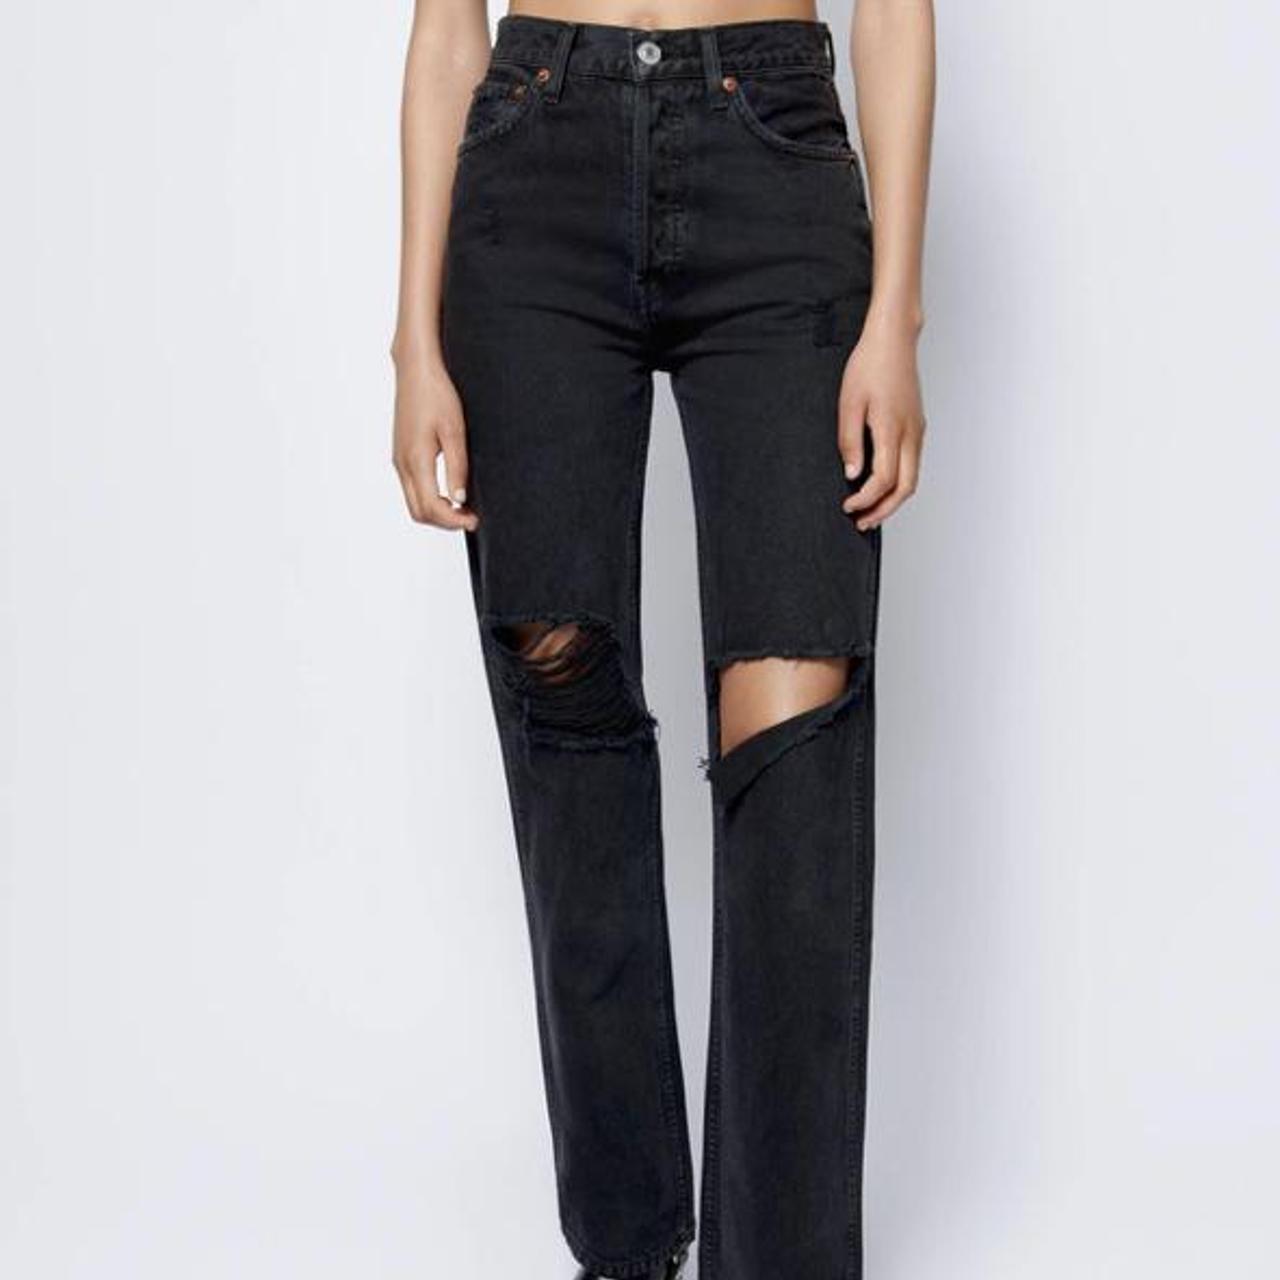 Product Image 1 - Redone High Rise Loose Jeans

Washed